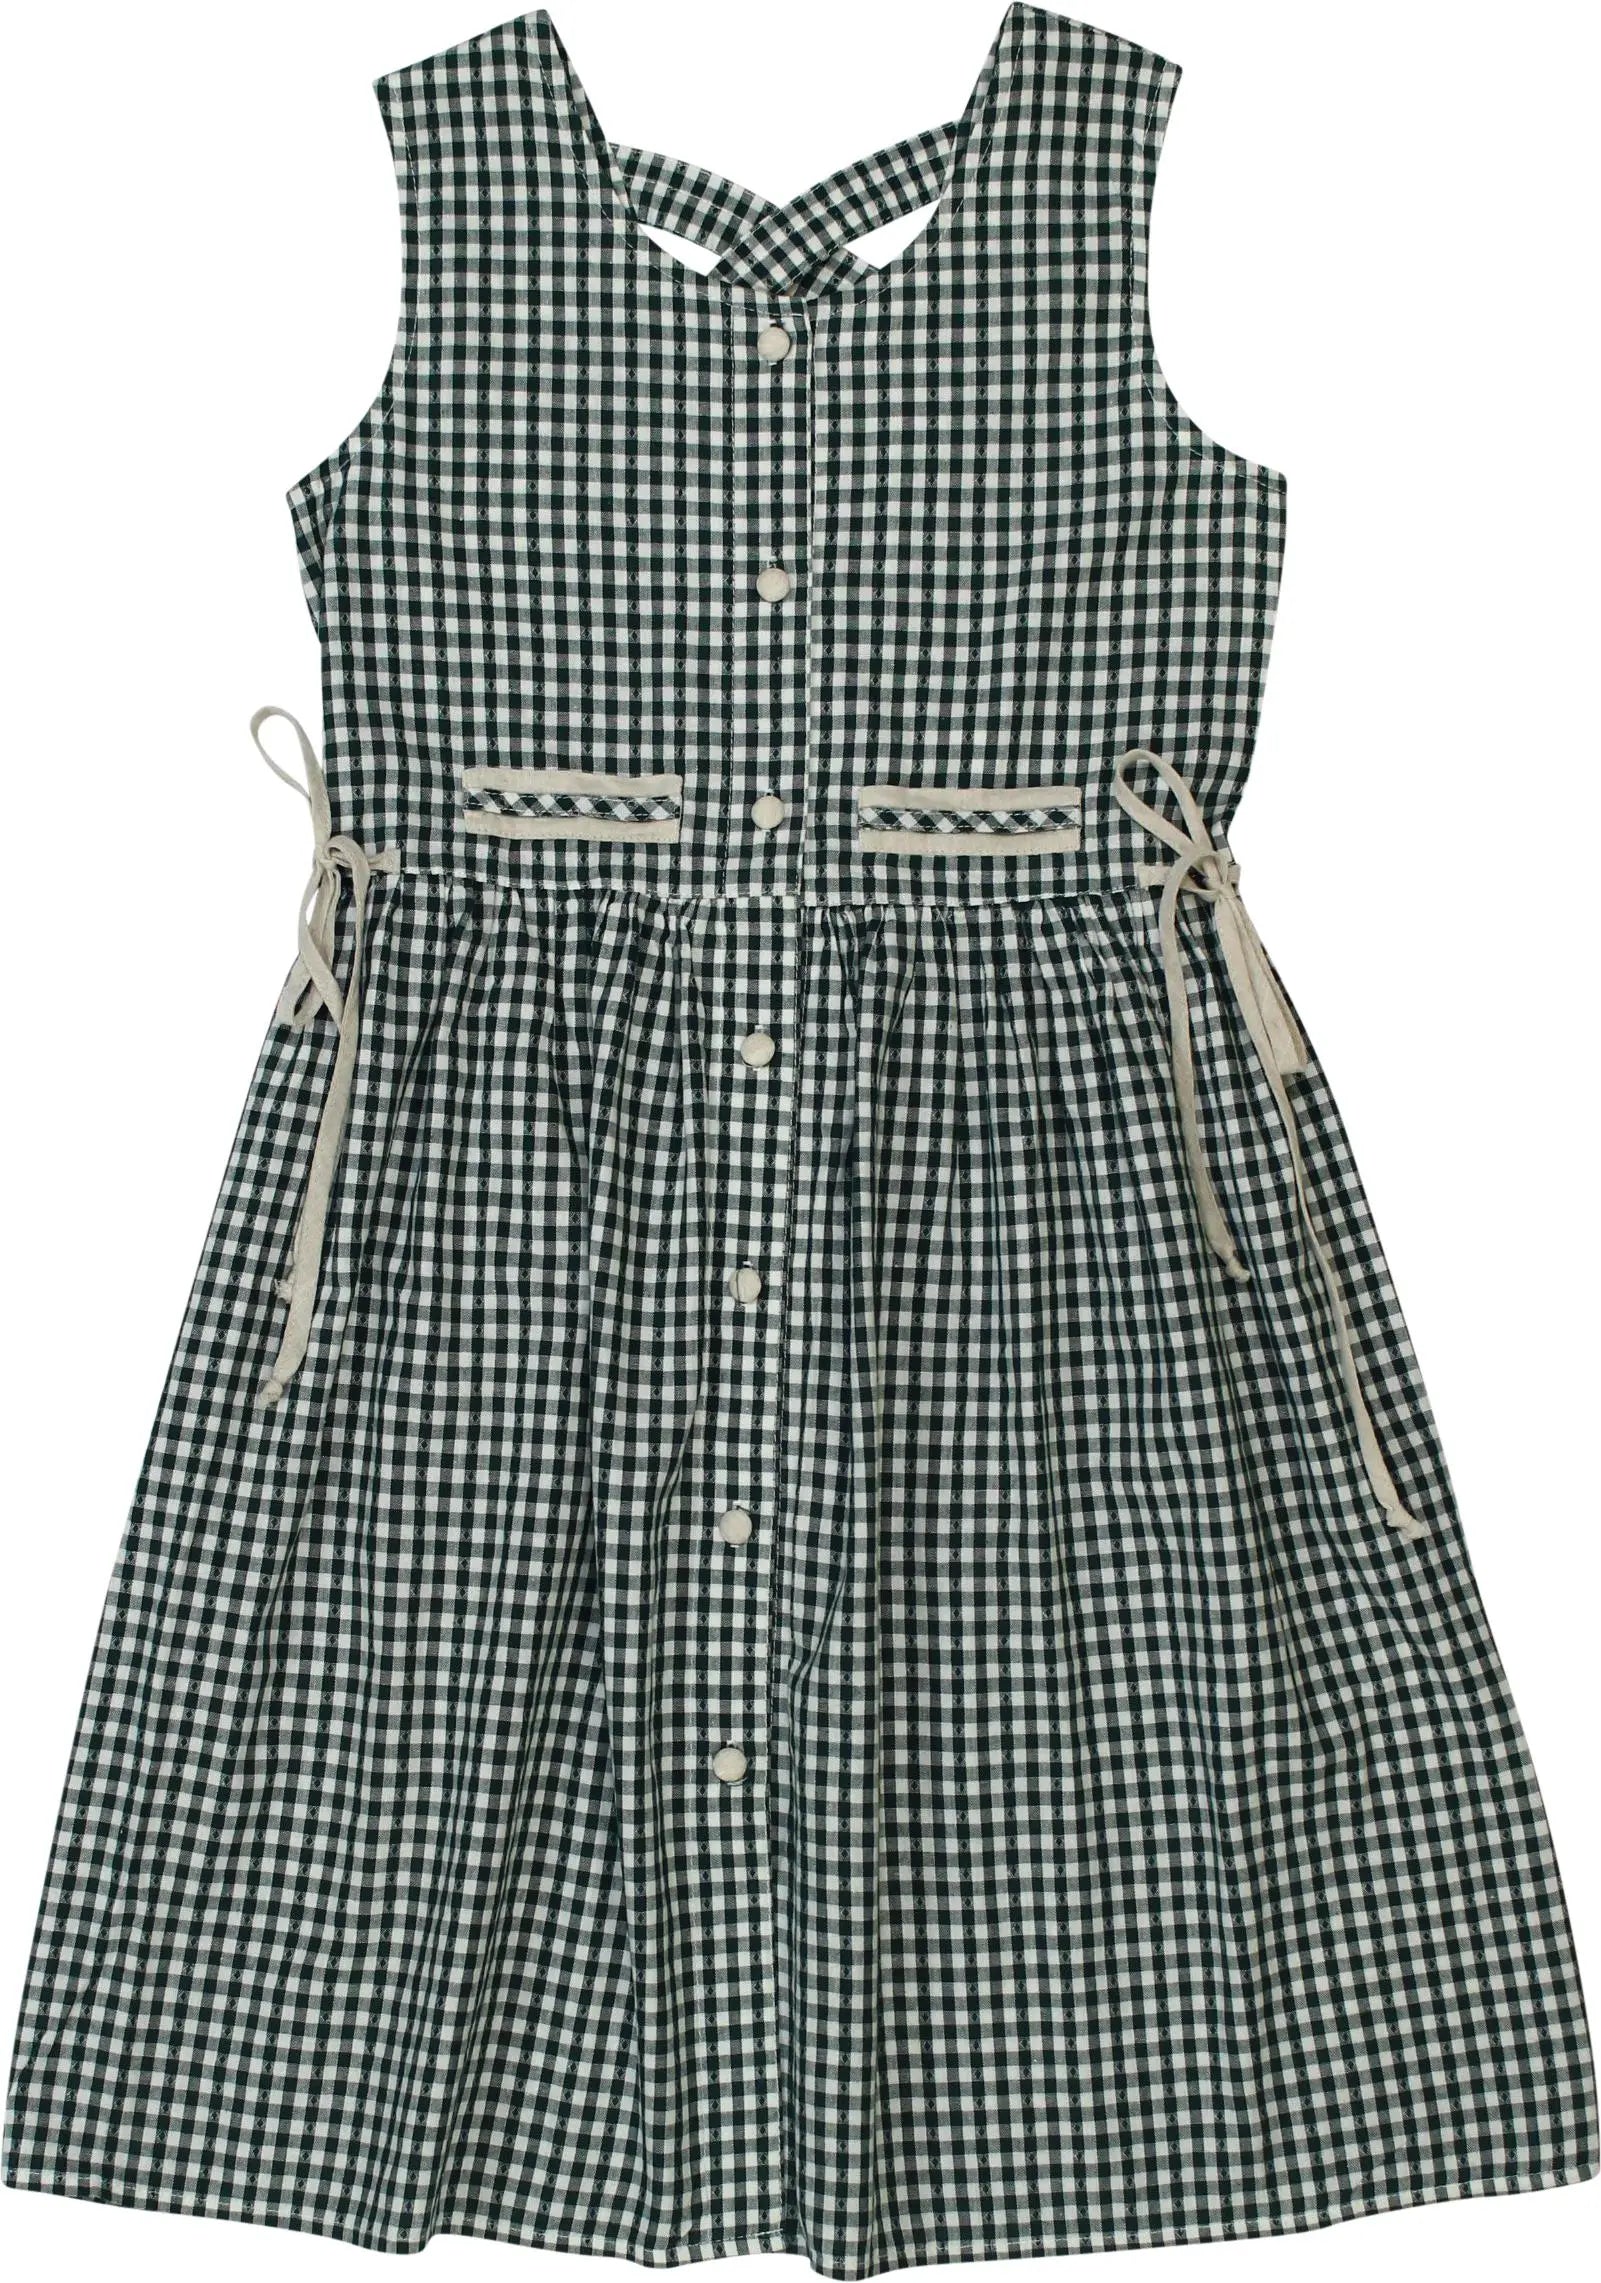 Unknown - Green Checked Dress- ThriftTale.com - Vintage and second handclothing